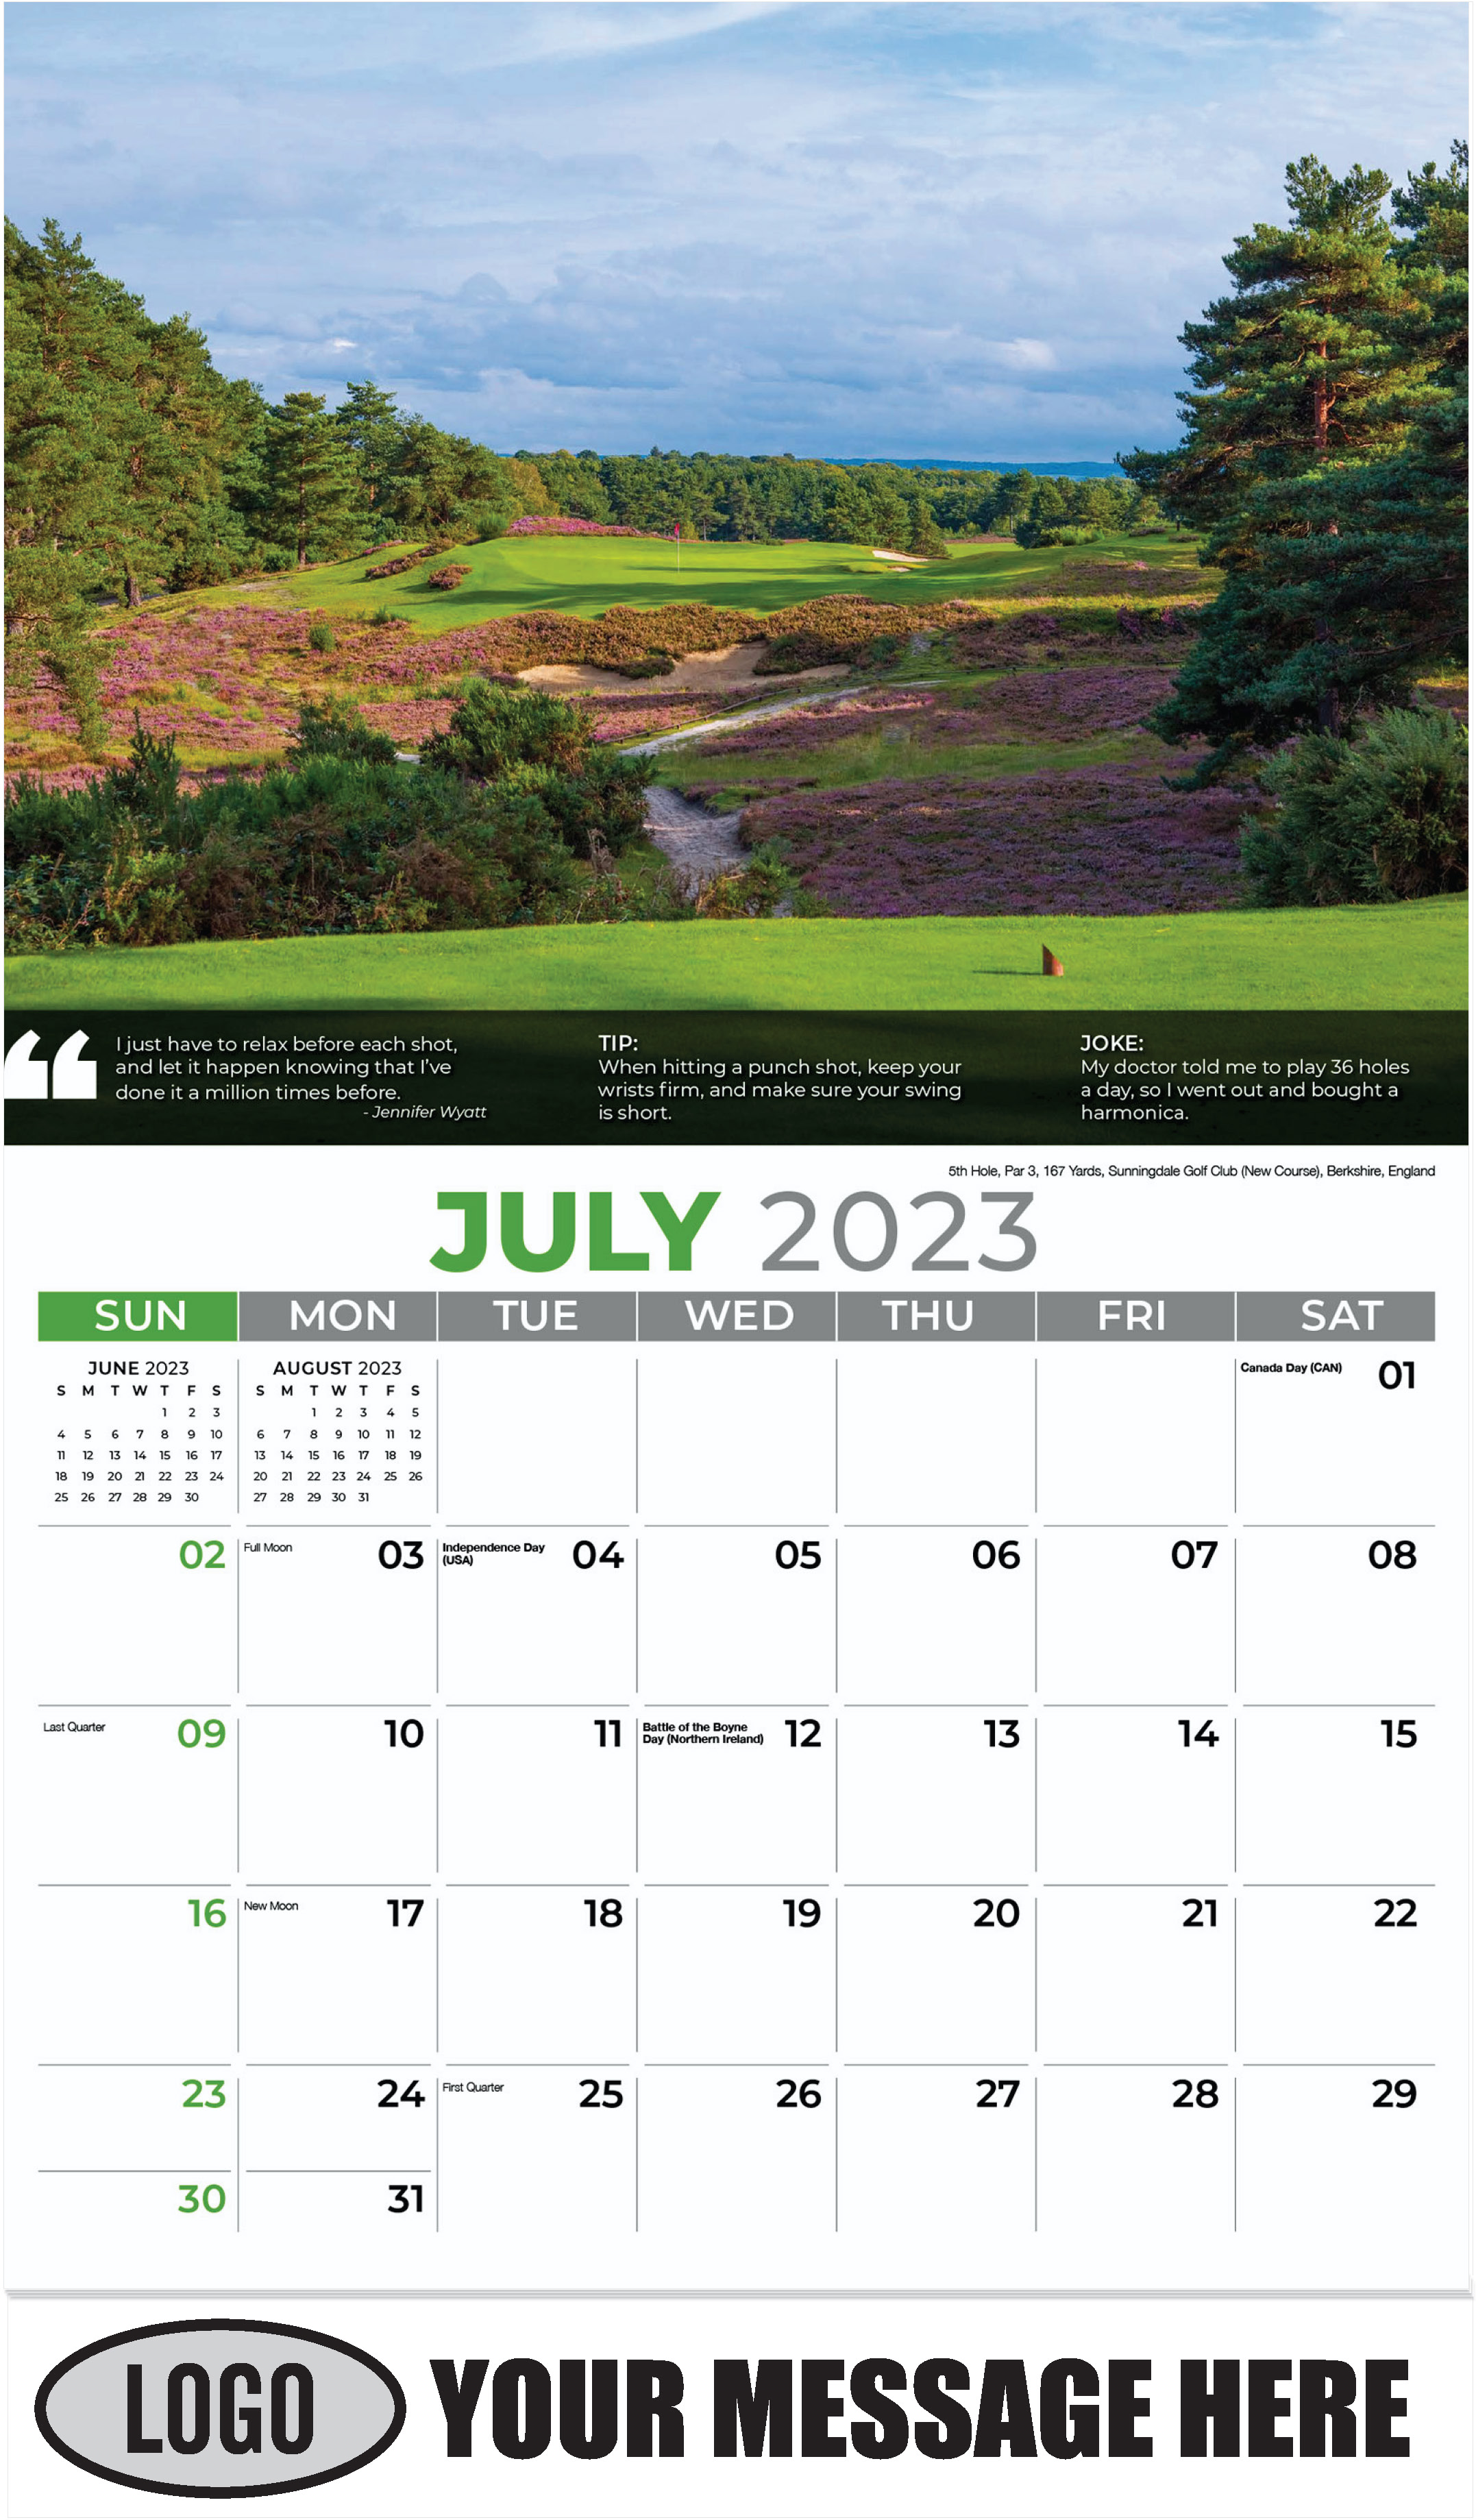 5th Hole, Par 3, 167 Yards, Sunningdale Golf Club (New Course), Berkshire, England - July - Golf Tips  (Tips, Quips and Holes) 2023 Promotional Calendar